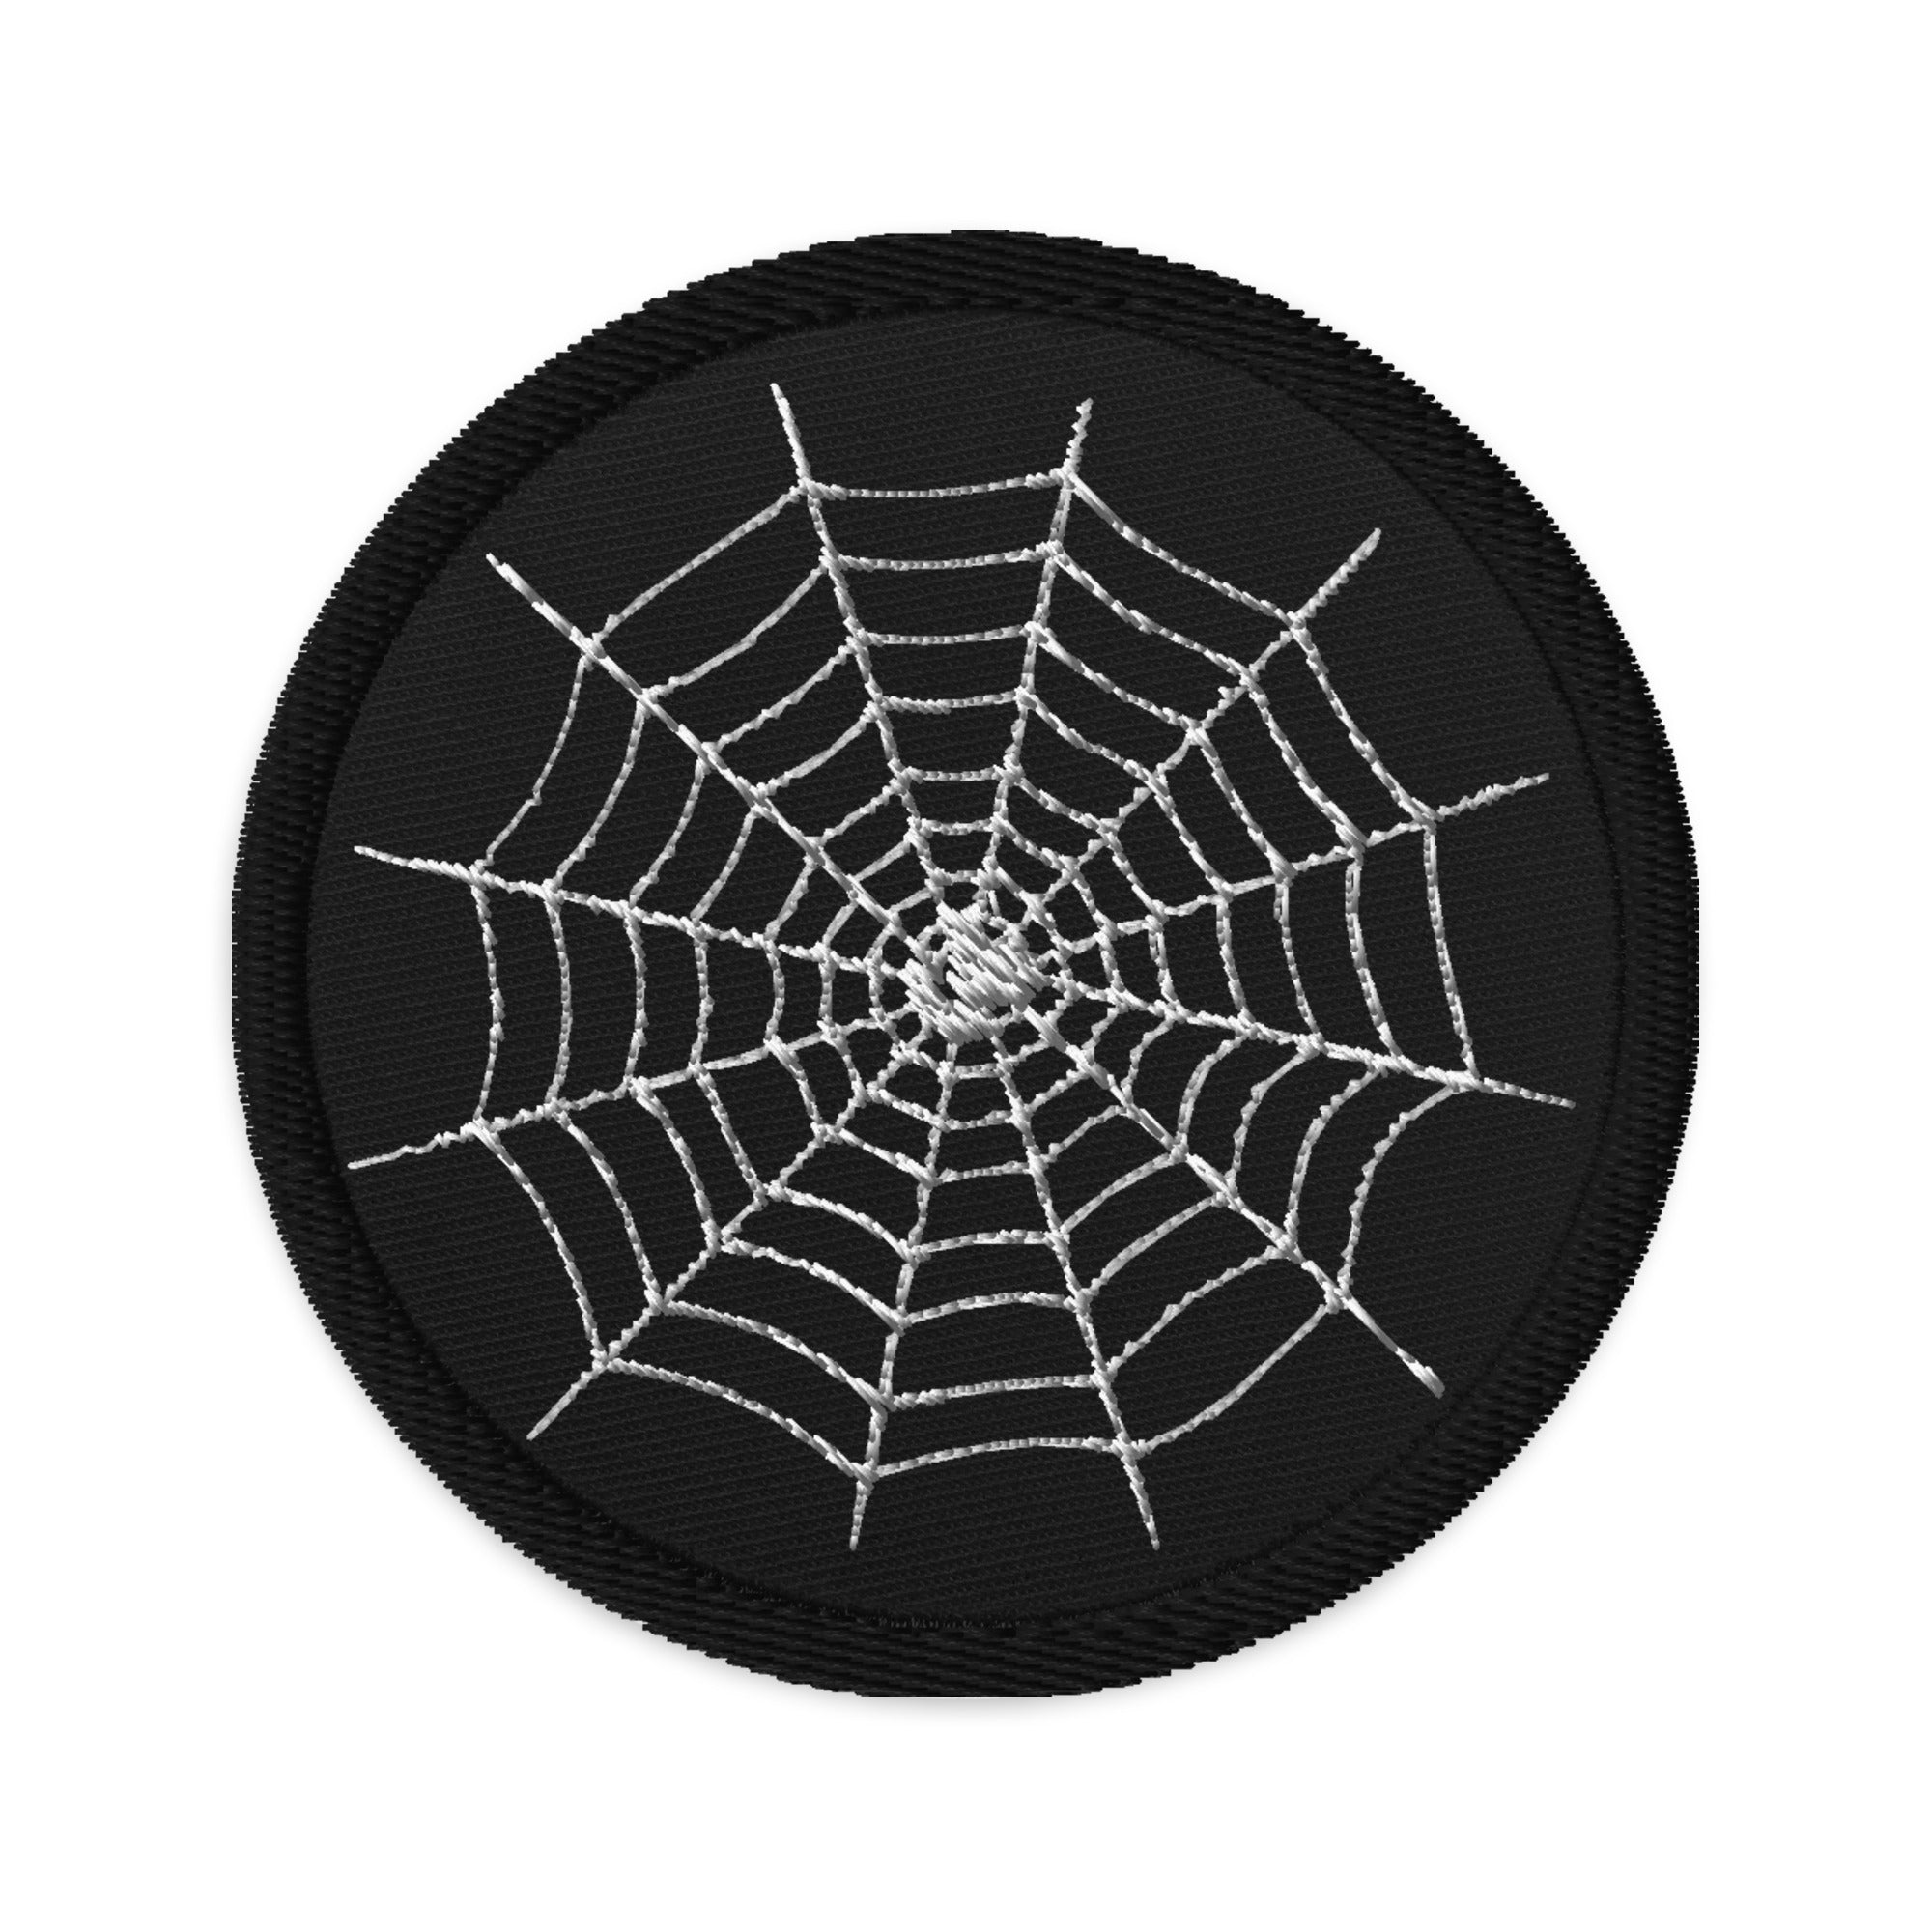 Creepy Spiderweb Halloween Goth Style Embroidered Patch - Edge of Life Designs